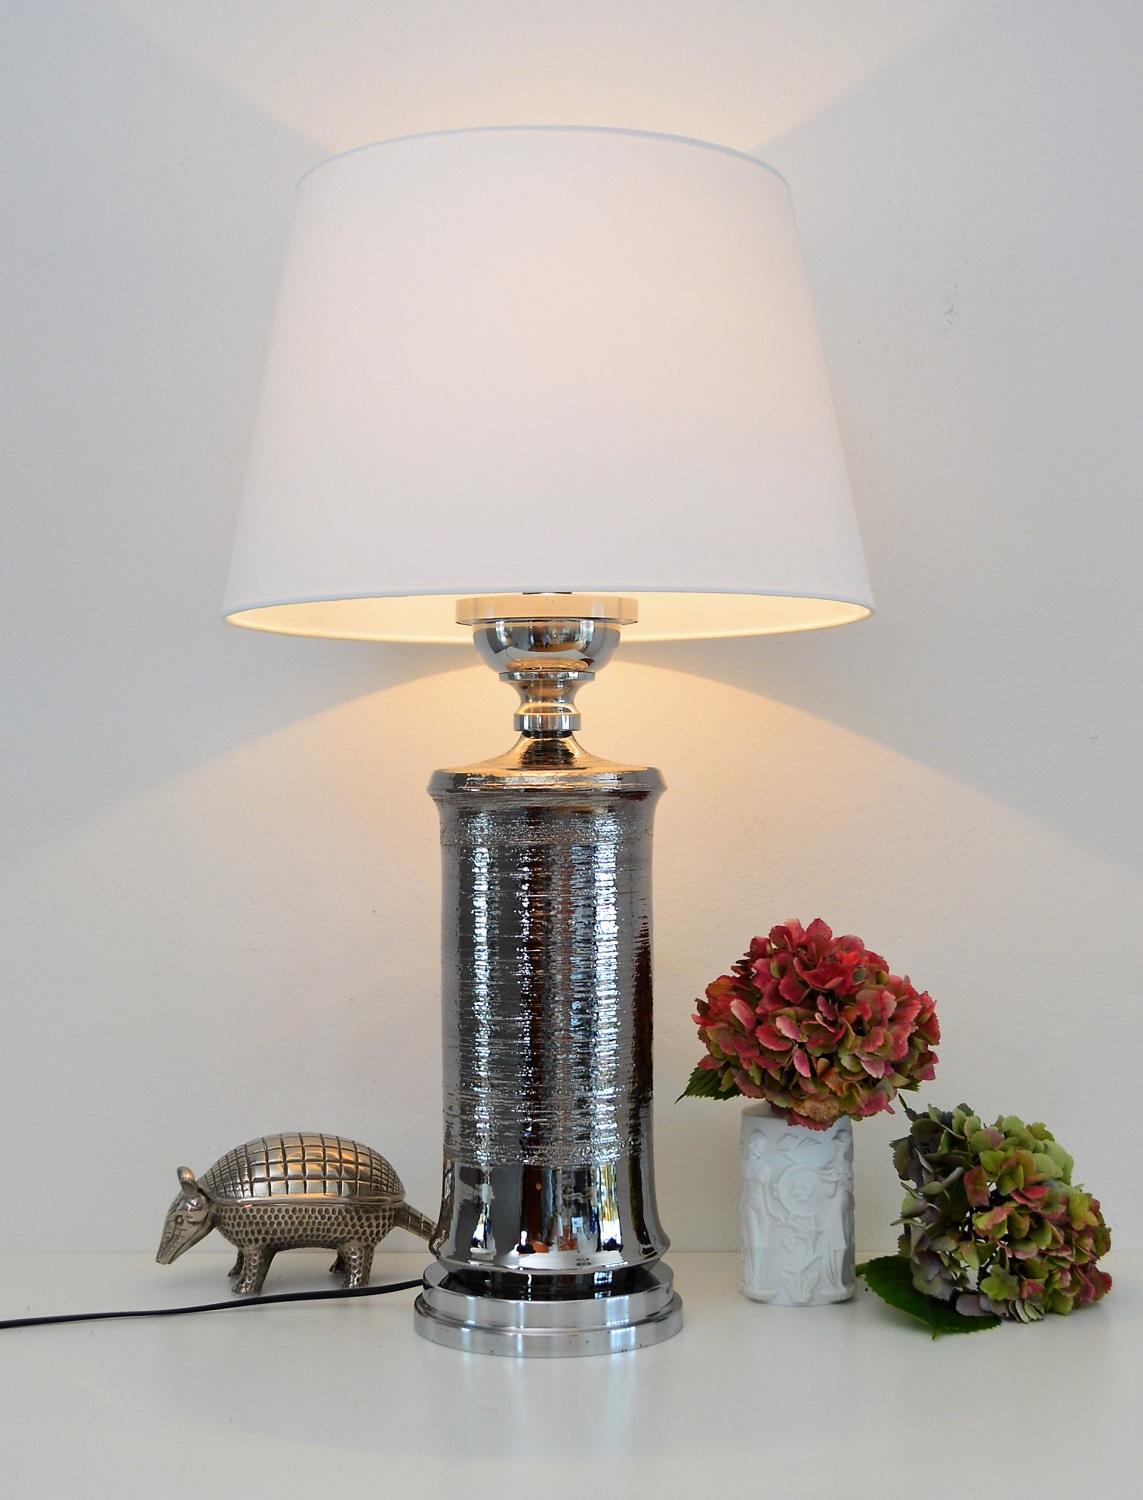 Beautiful ceramic table lamp made in the 1970s by Bitossi, Italy.
The middle ceramic part from Bitossi is with shiny silver glaze called platinum and in mint condition.
The lamps base and upper part is chrome plated metal; there is a cord too to